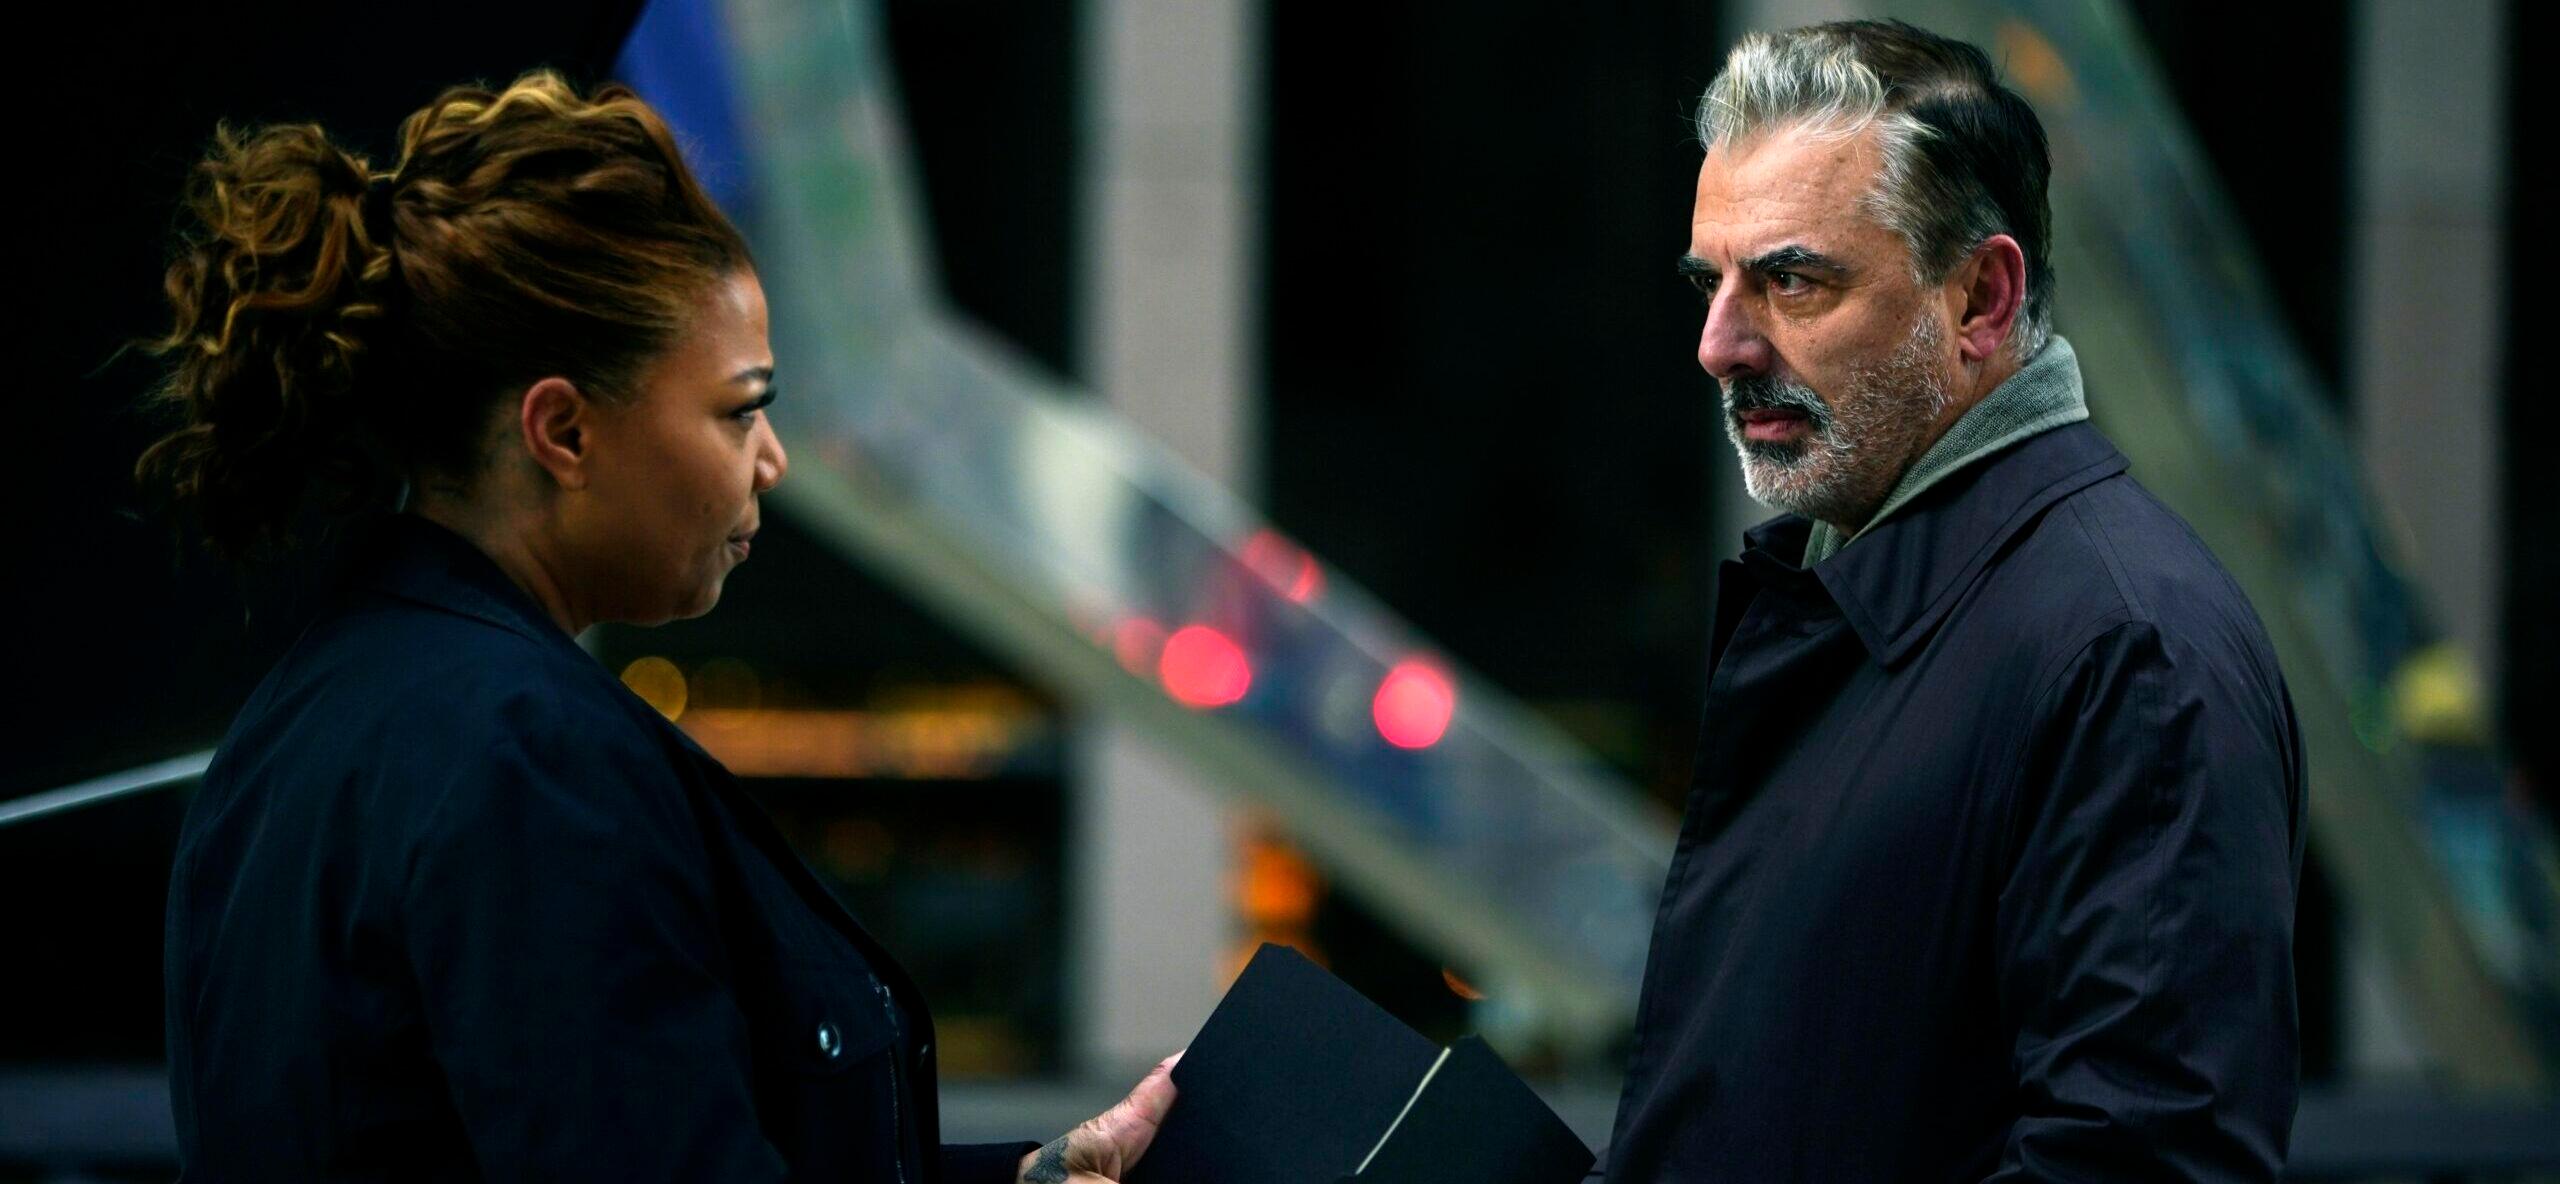 Chris Noth DROPPED From 'The Equalizer' Amid Sexual Assault Allegations